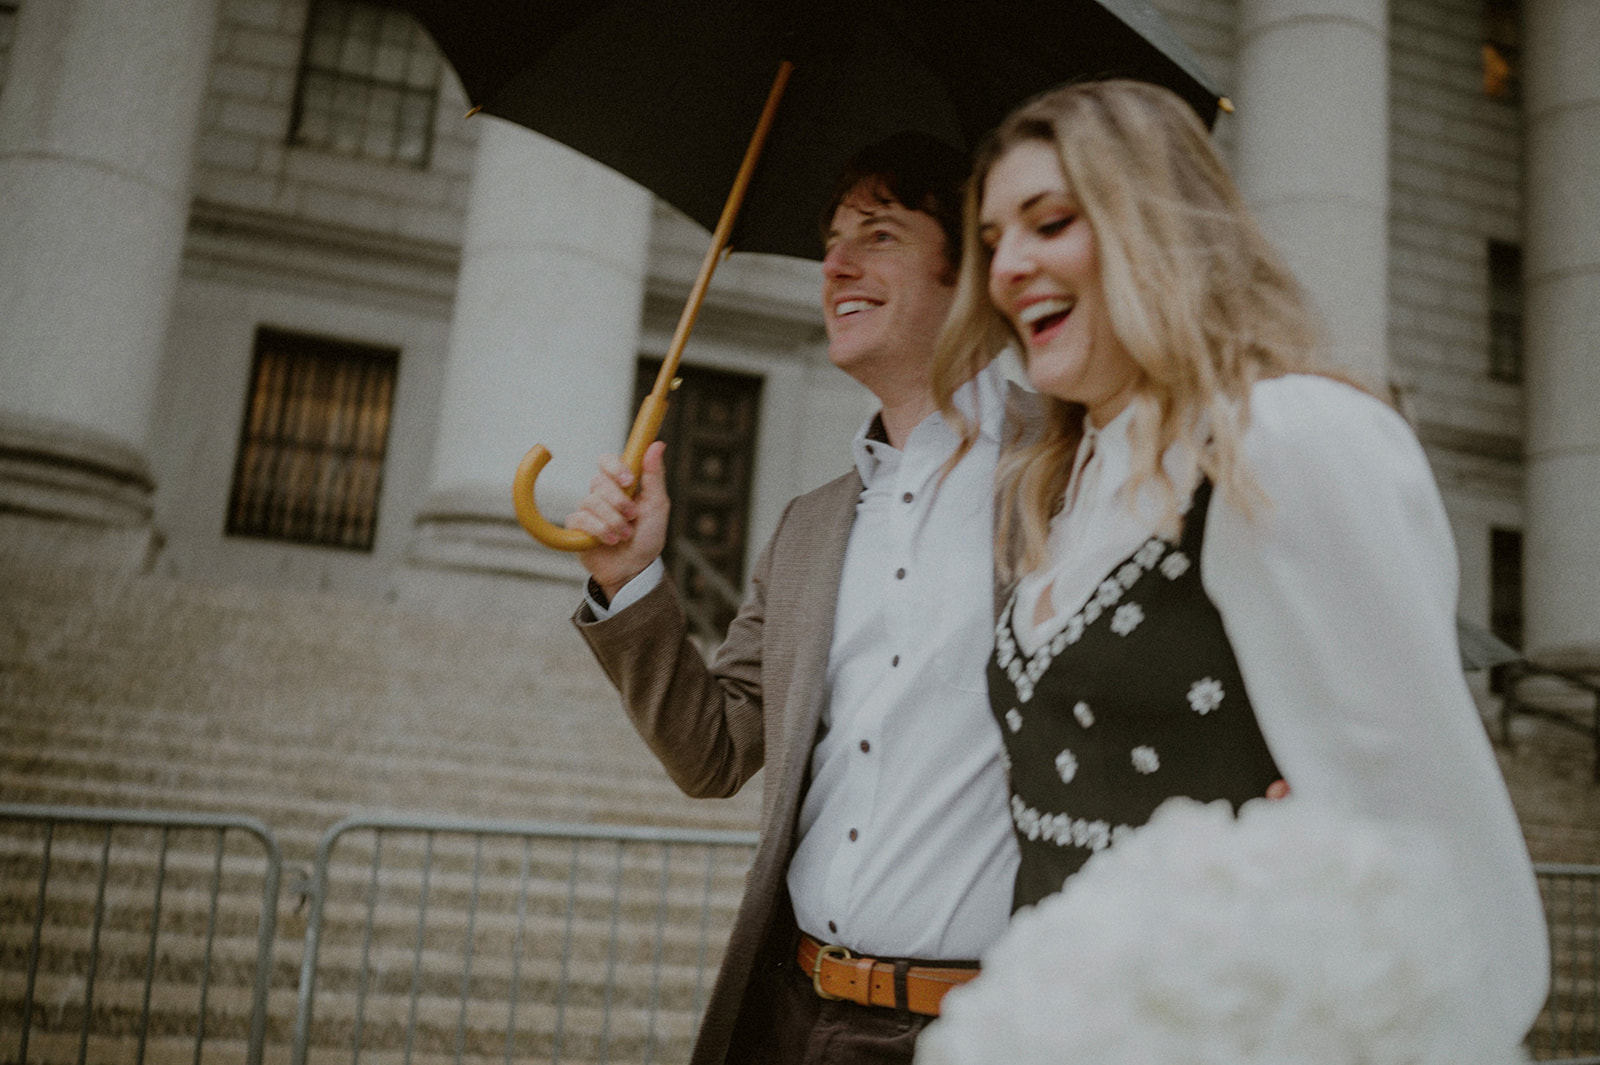 couple on their way to their city hall elopement in nyc holding an umbrella and a bouquet of flowers